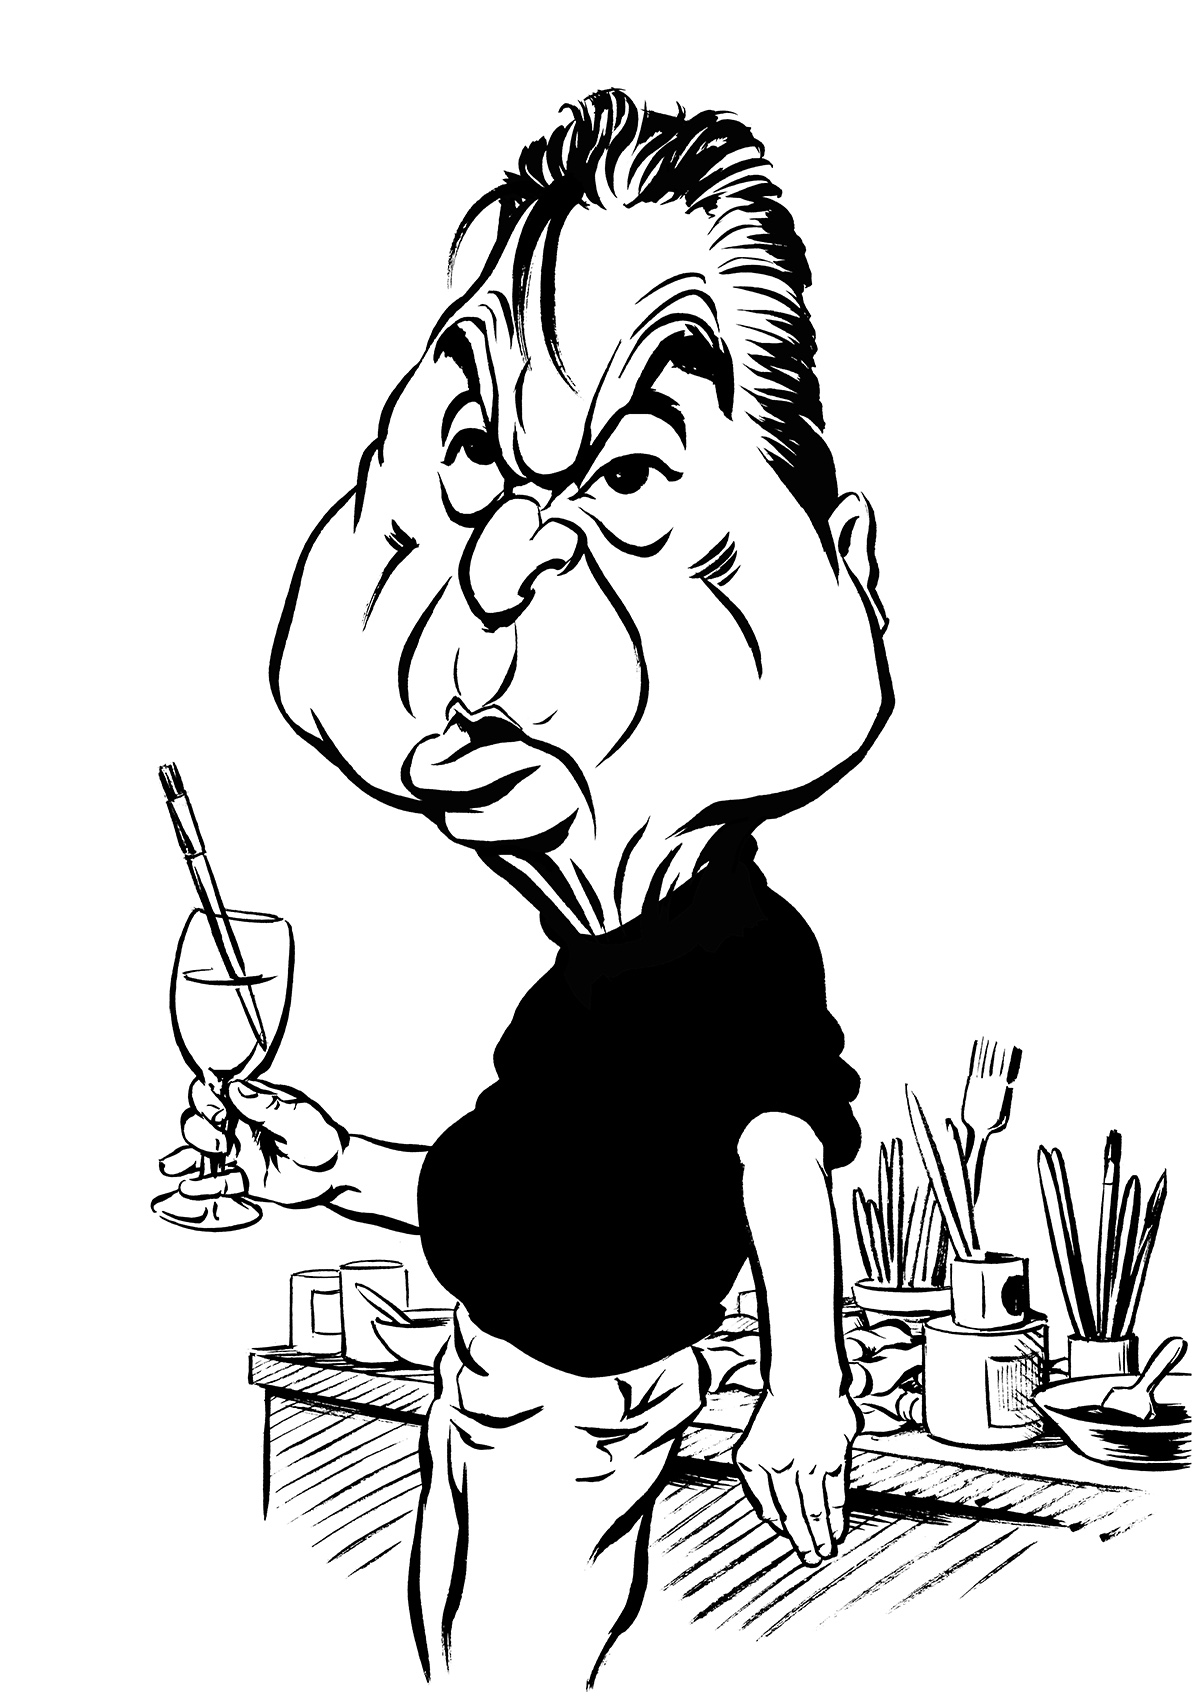 Francis Bacon caricature, British post-war artist and painter, London, Soho. By Ken Lowe Illustration. Limited edition prints available, size A2 or A3, signed and numbered by Ken Lowe.